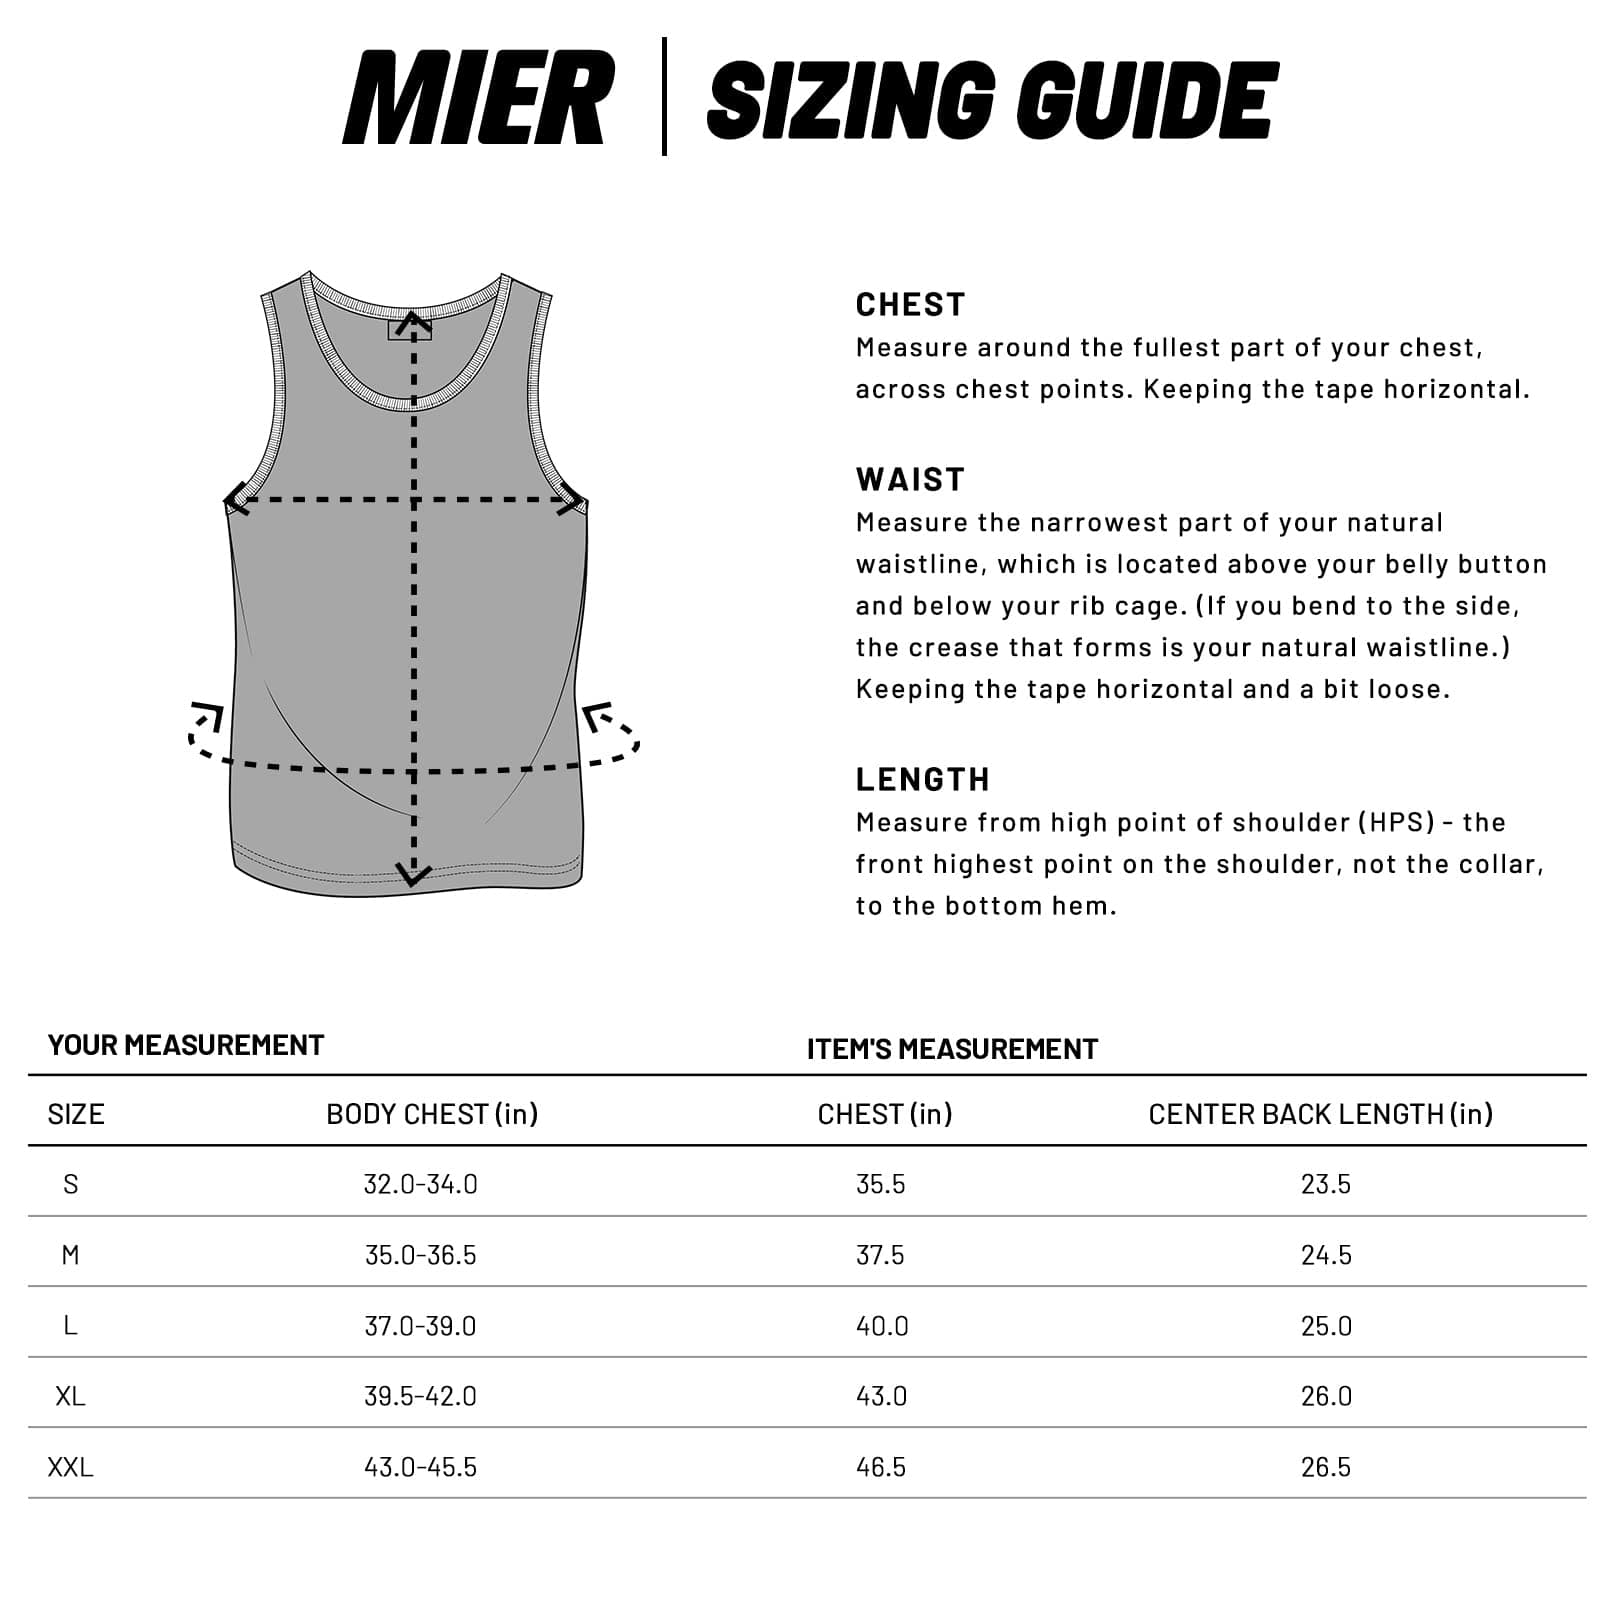 Women Workout Tank Top Dry Fit Sleeveless Athletic Shirts Women Active Shirt MIER